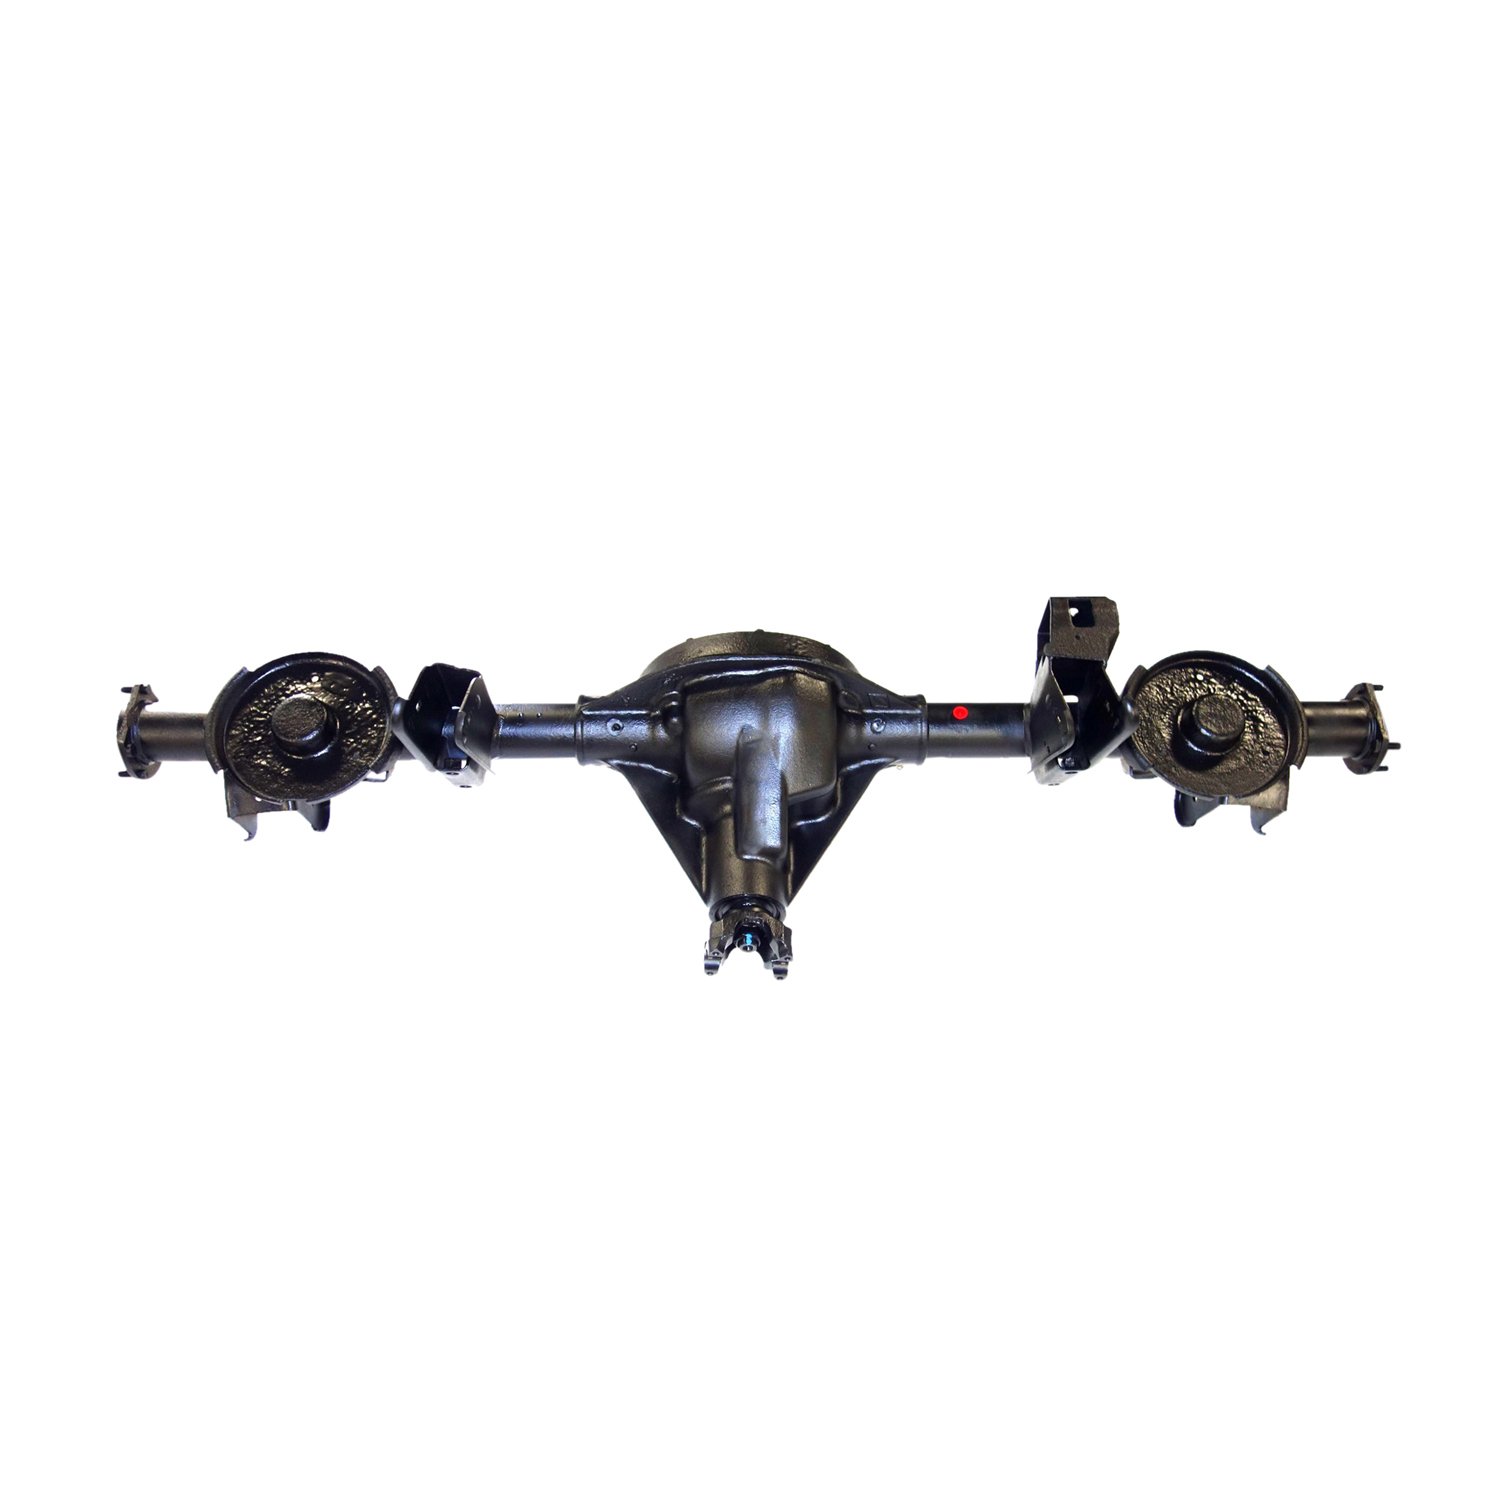 Remanufactured Complete Axle Assembly for Dana 35 97-02 Wrangler 4.11 w/o ABS, Posi LSD